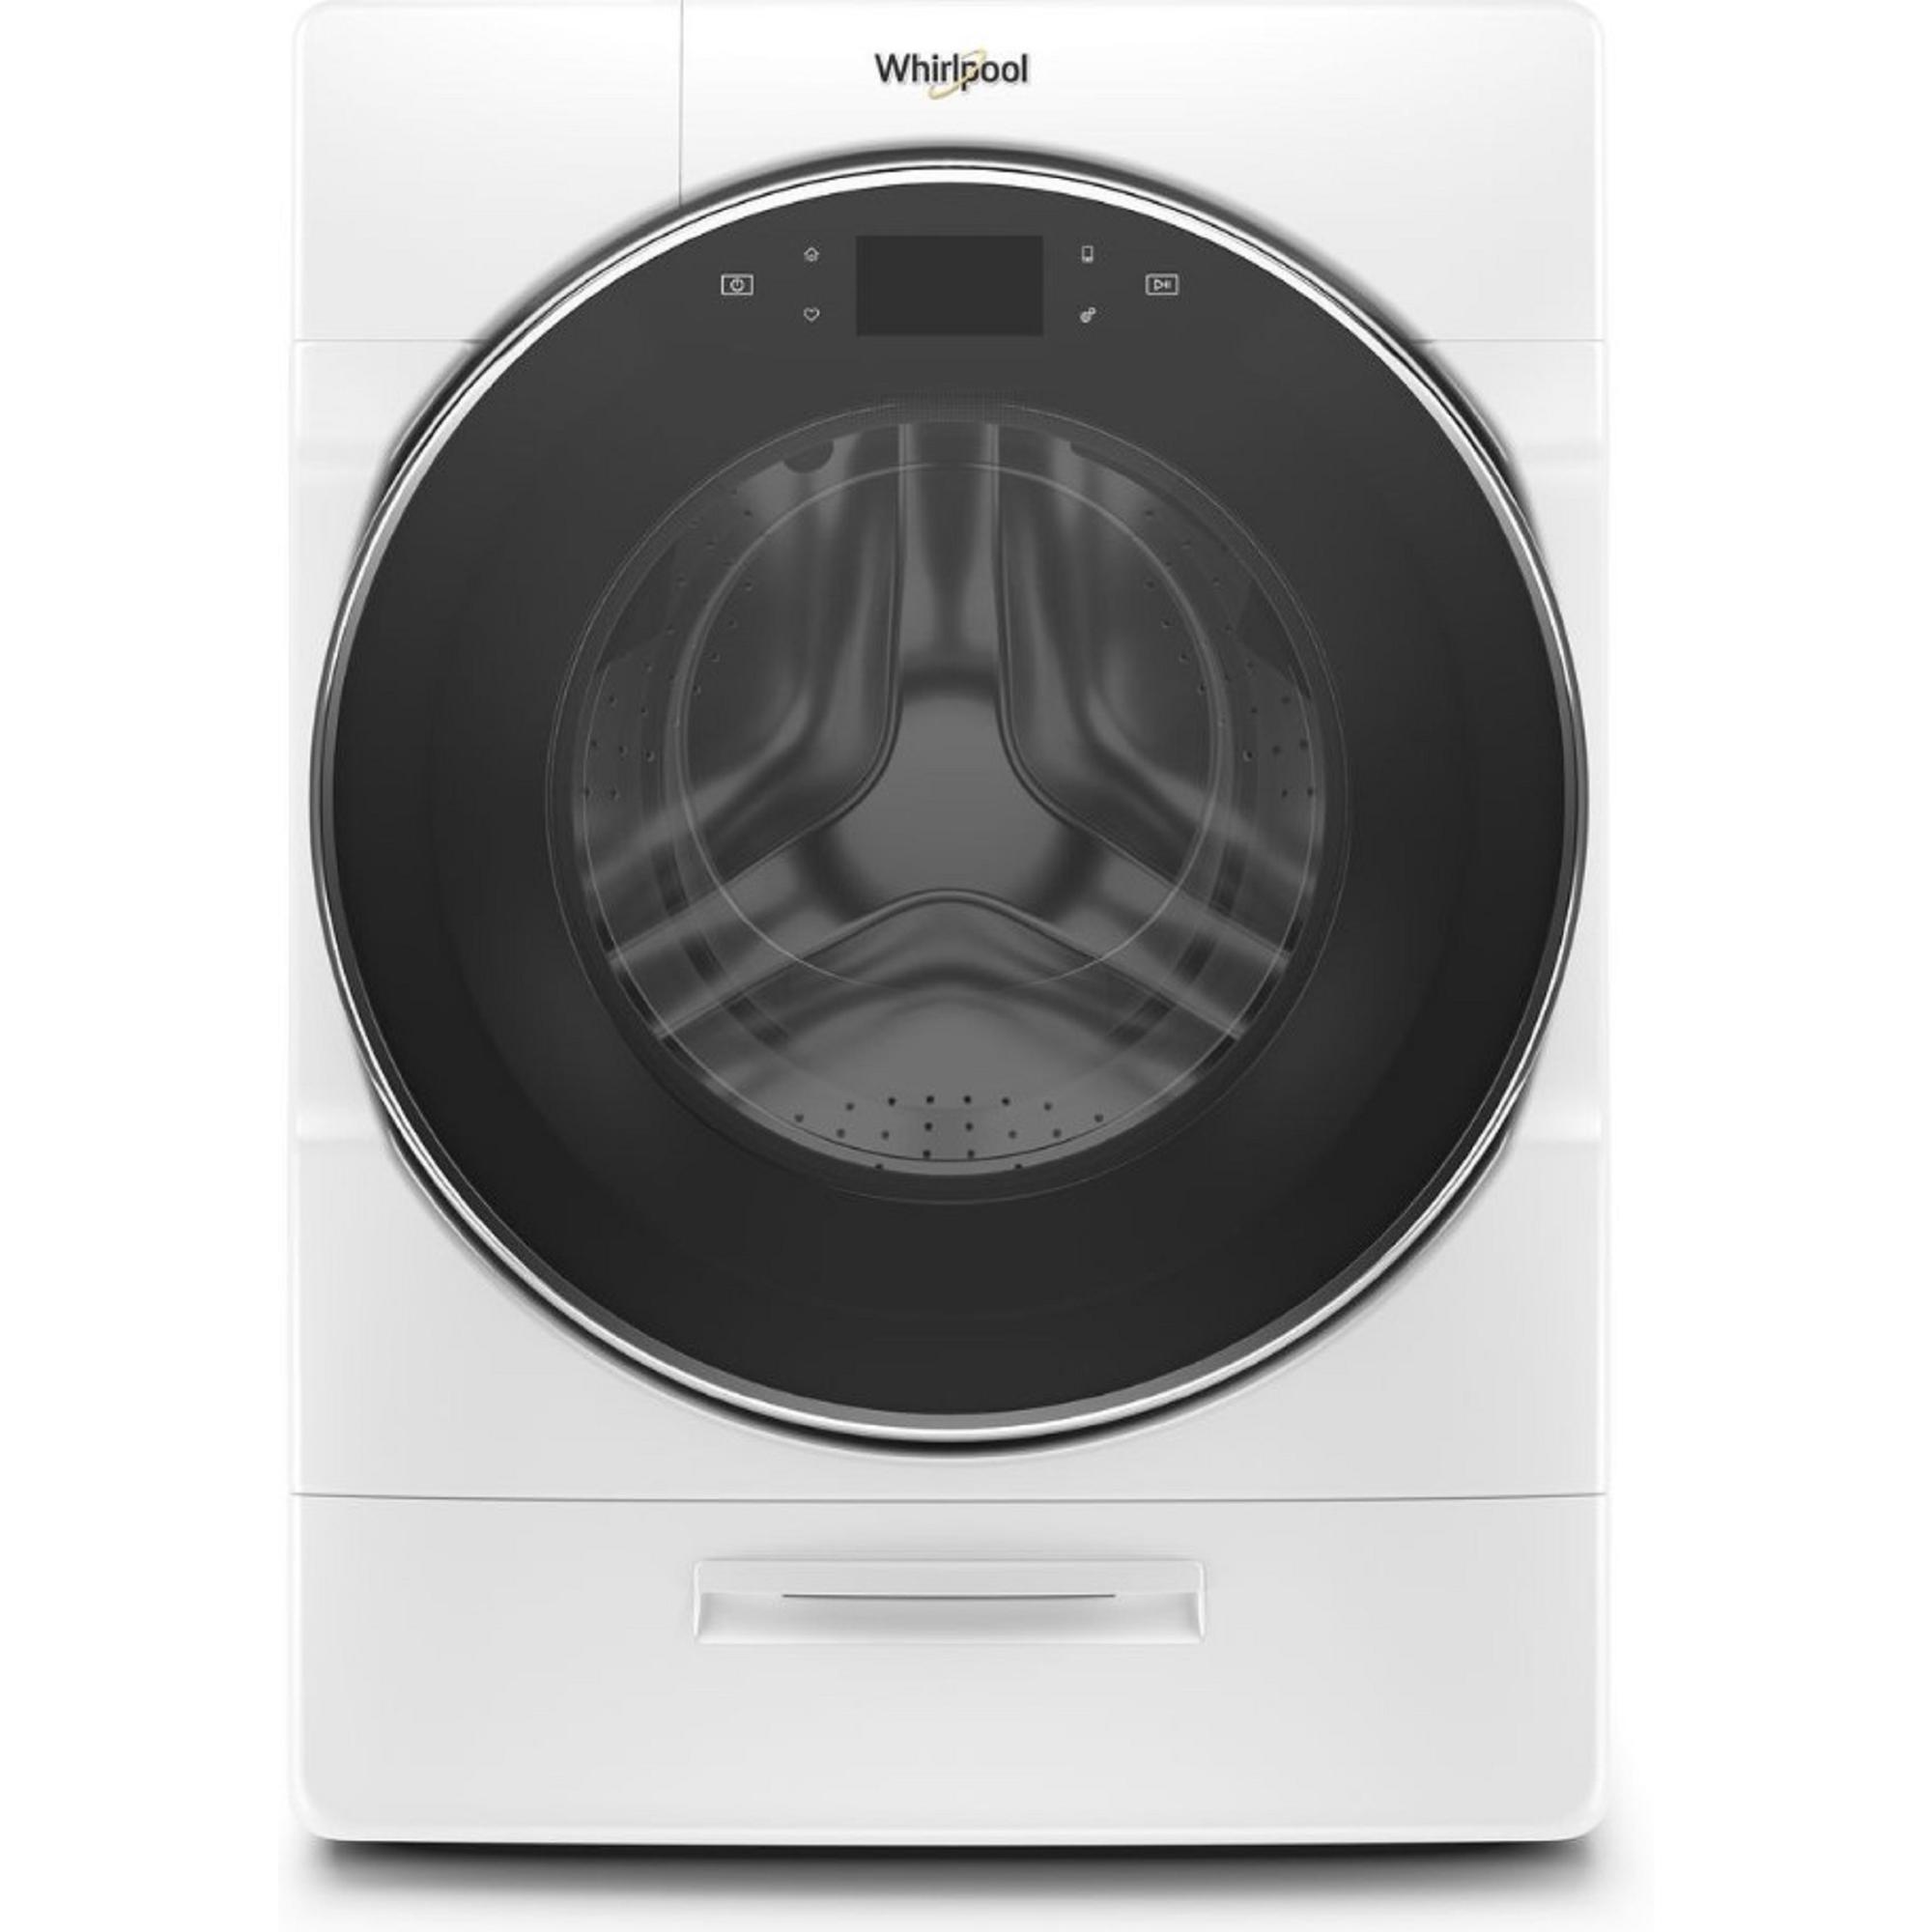 Whirlpool WFW8620HW 5.0 cu. ft. High Efficiency White Front Load Washer